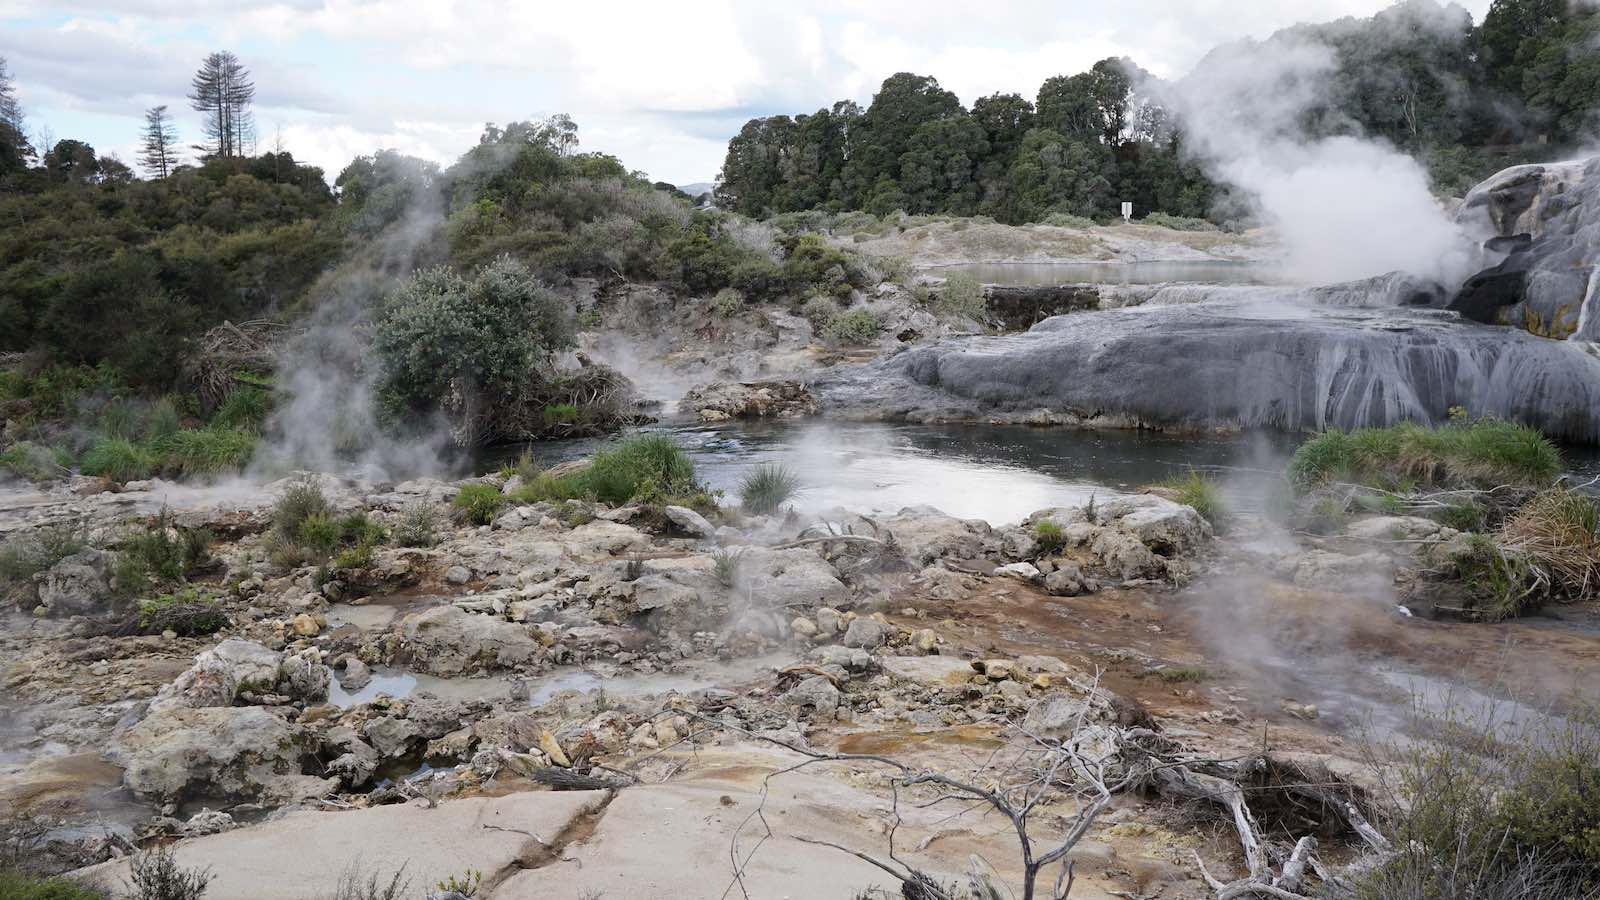 There was a park in Rotorua there called Te Puia which had a ton of hotspots like this